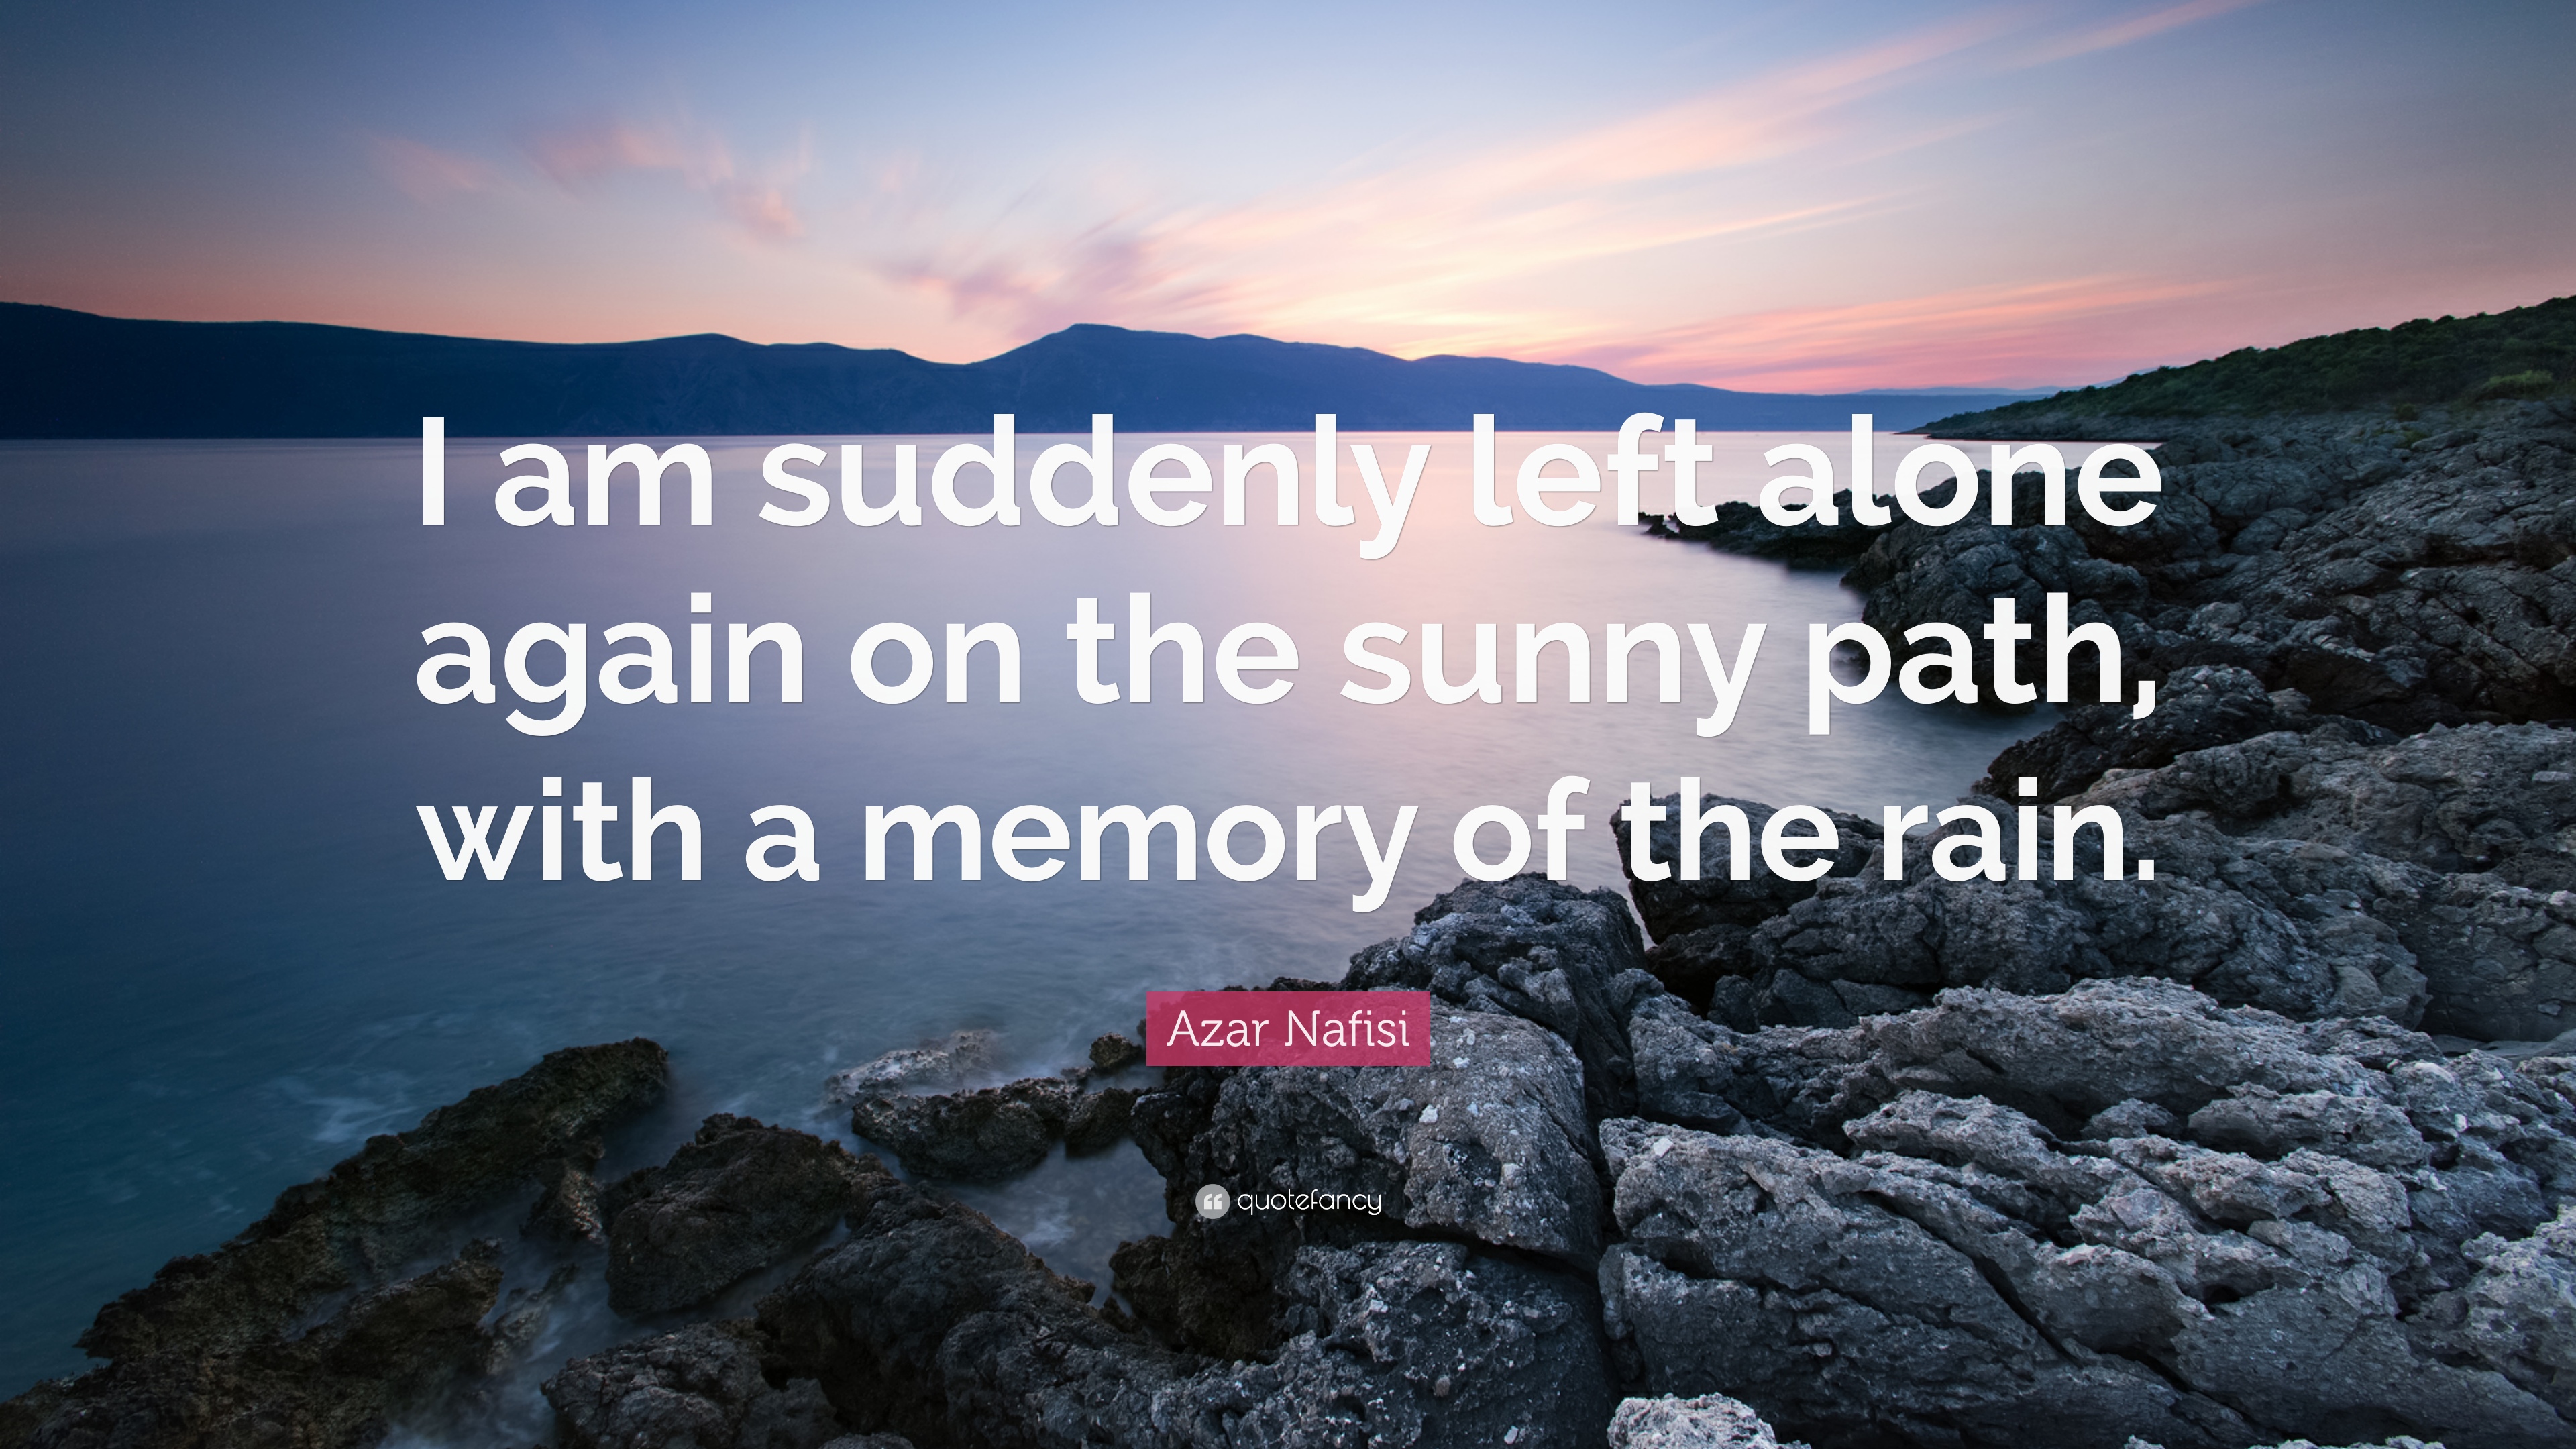 Azar Nafisi Quote: “I am suddenly left alone again on the sunny path ...